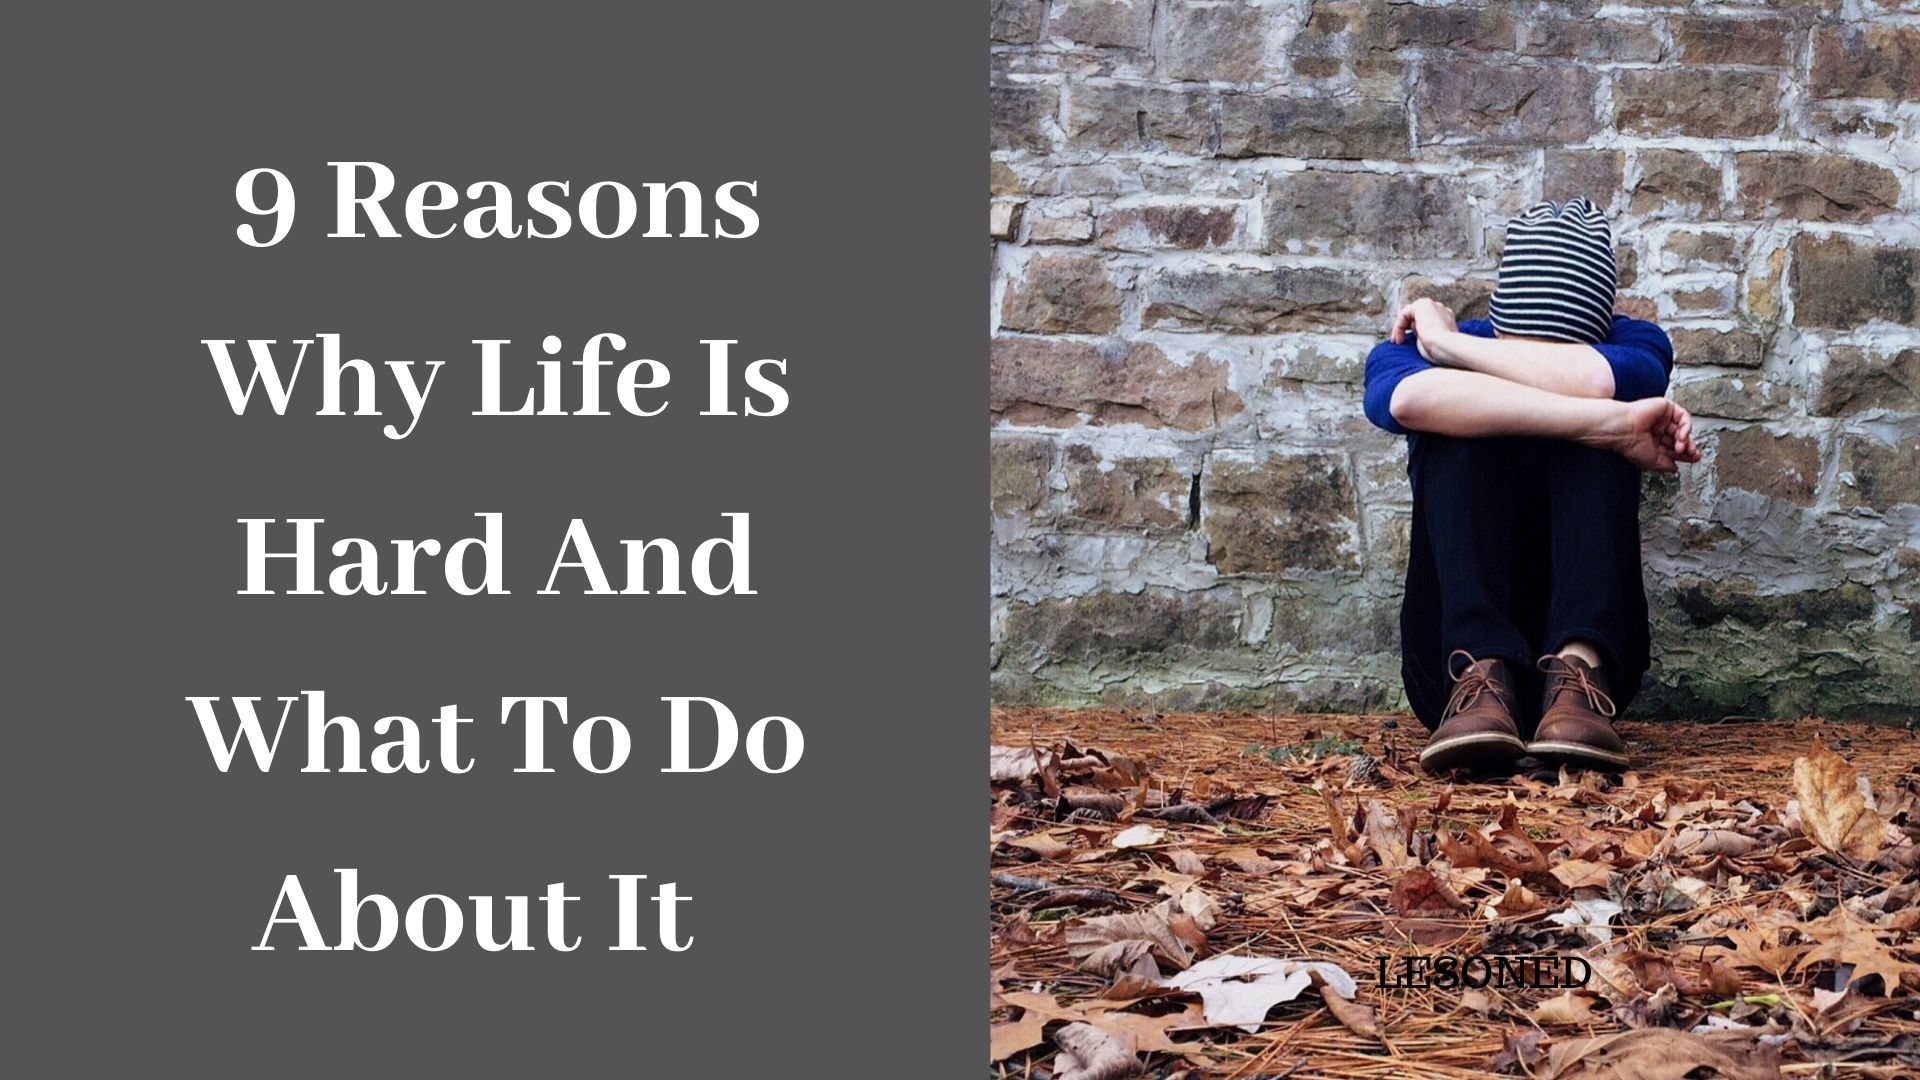 9 reasons why life is so hard and what to do about it